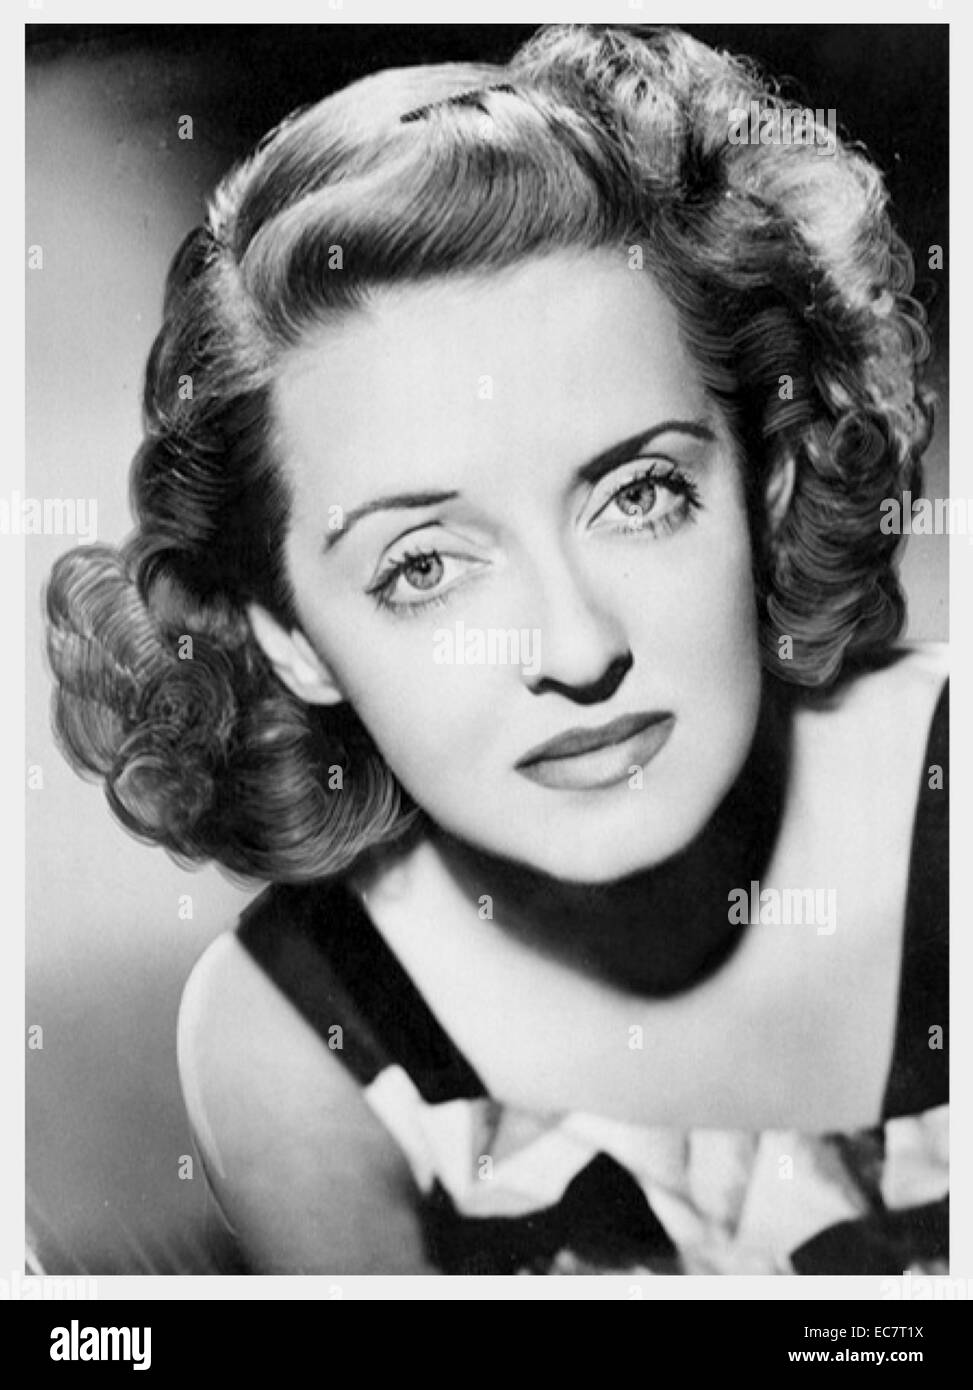 Bette Davis (1908-1989) - also know as The First Lady of American Cinema - was an American film, television and theatre actress. Notable because of her willingness to play sardonic and unsympathetic characters she pioneered equal pay for women in the film Stock Photo